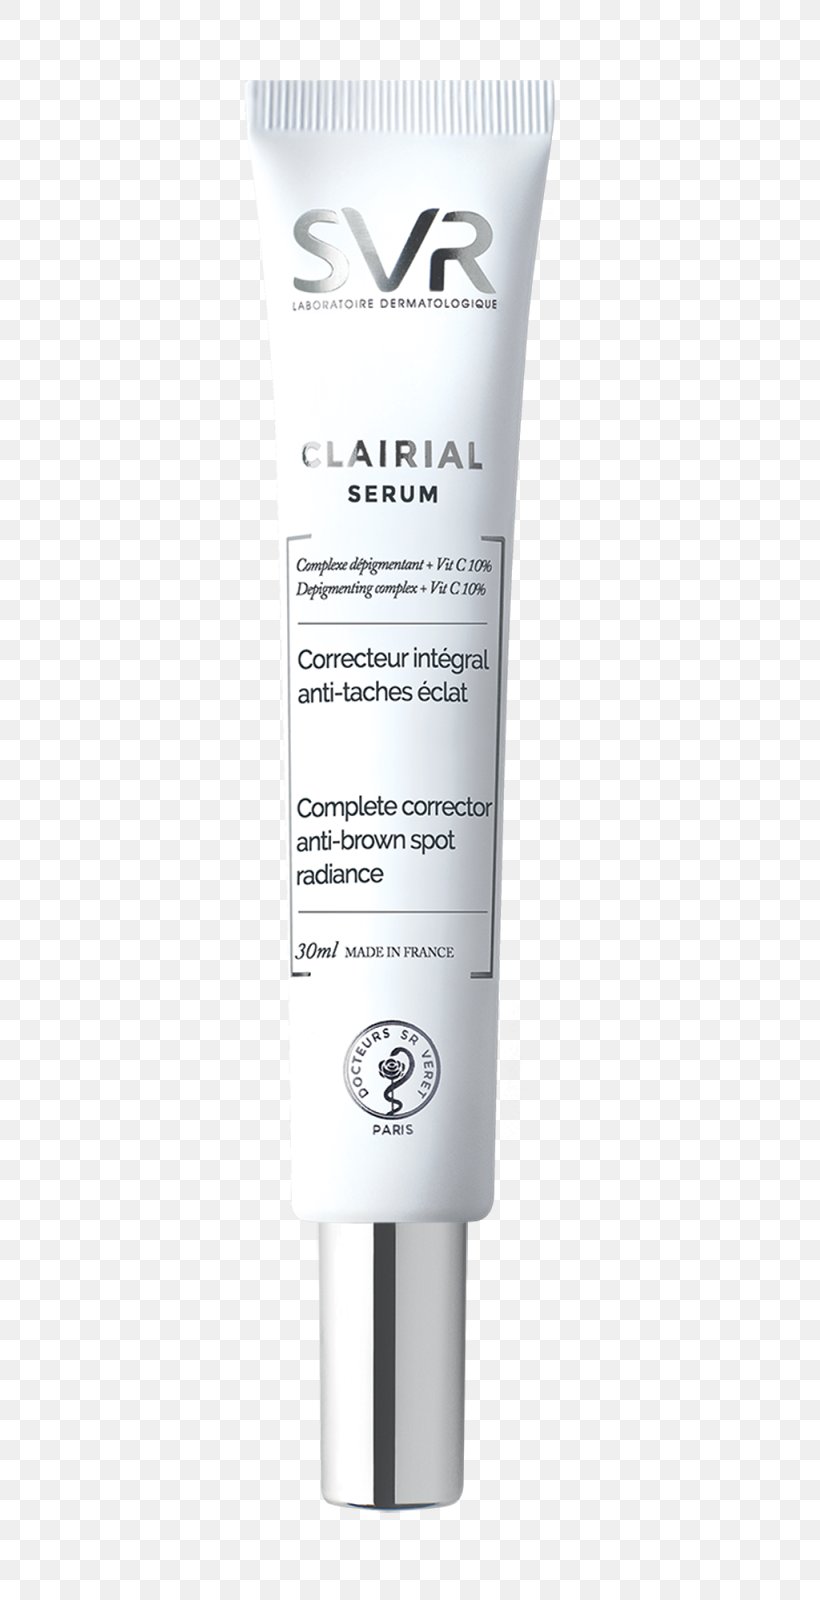 SVR CLARIAL 10 Cream Lotion Cosmetics Milliliter, PNG, 629x1600px, Lotion, Beauty, Cc Cream, Concealer, Cosmetics Download Free